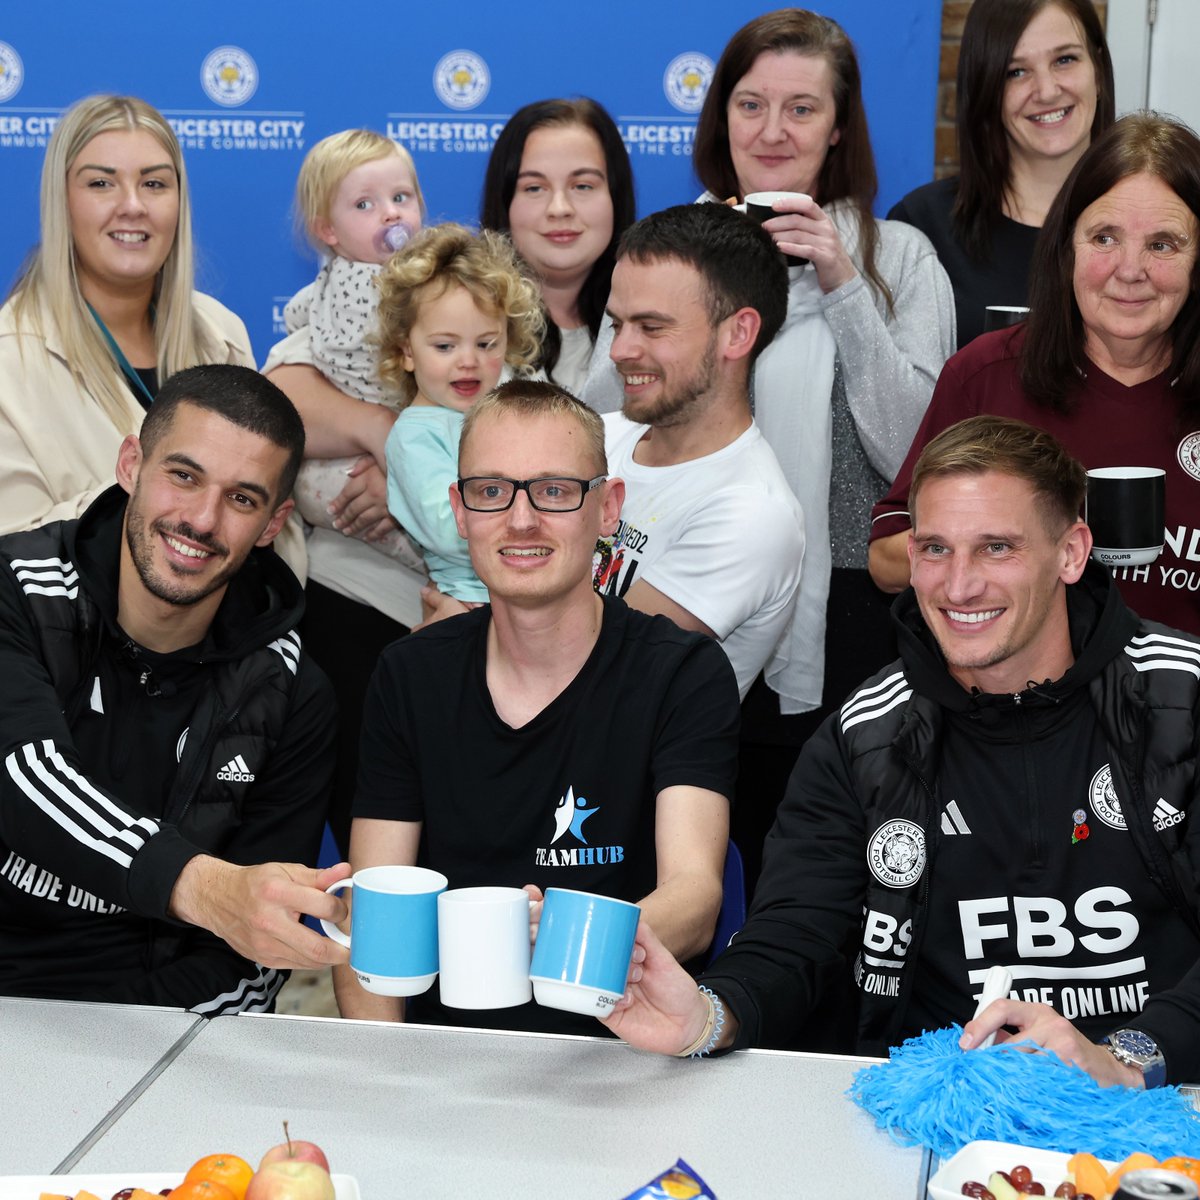 Tea, anyone? 😅

Marc Albrighton and Conor Coady celebrating all things community during the #EFLWeekOfAction 💙

#WeAreLeicester